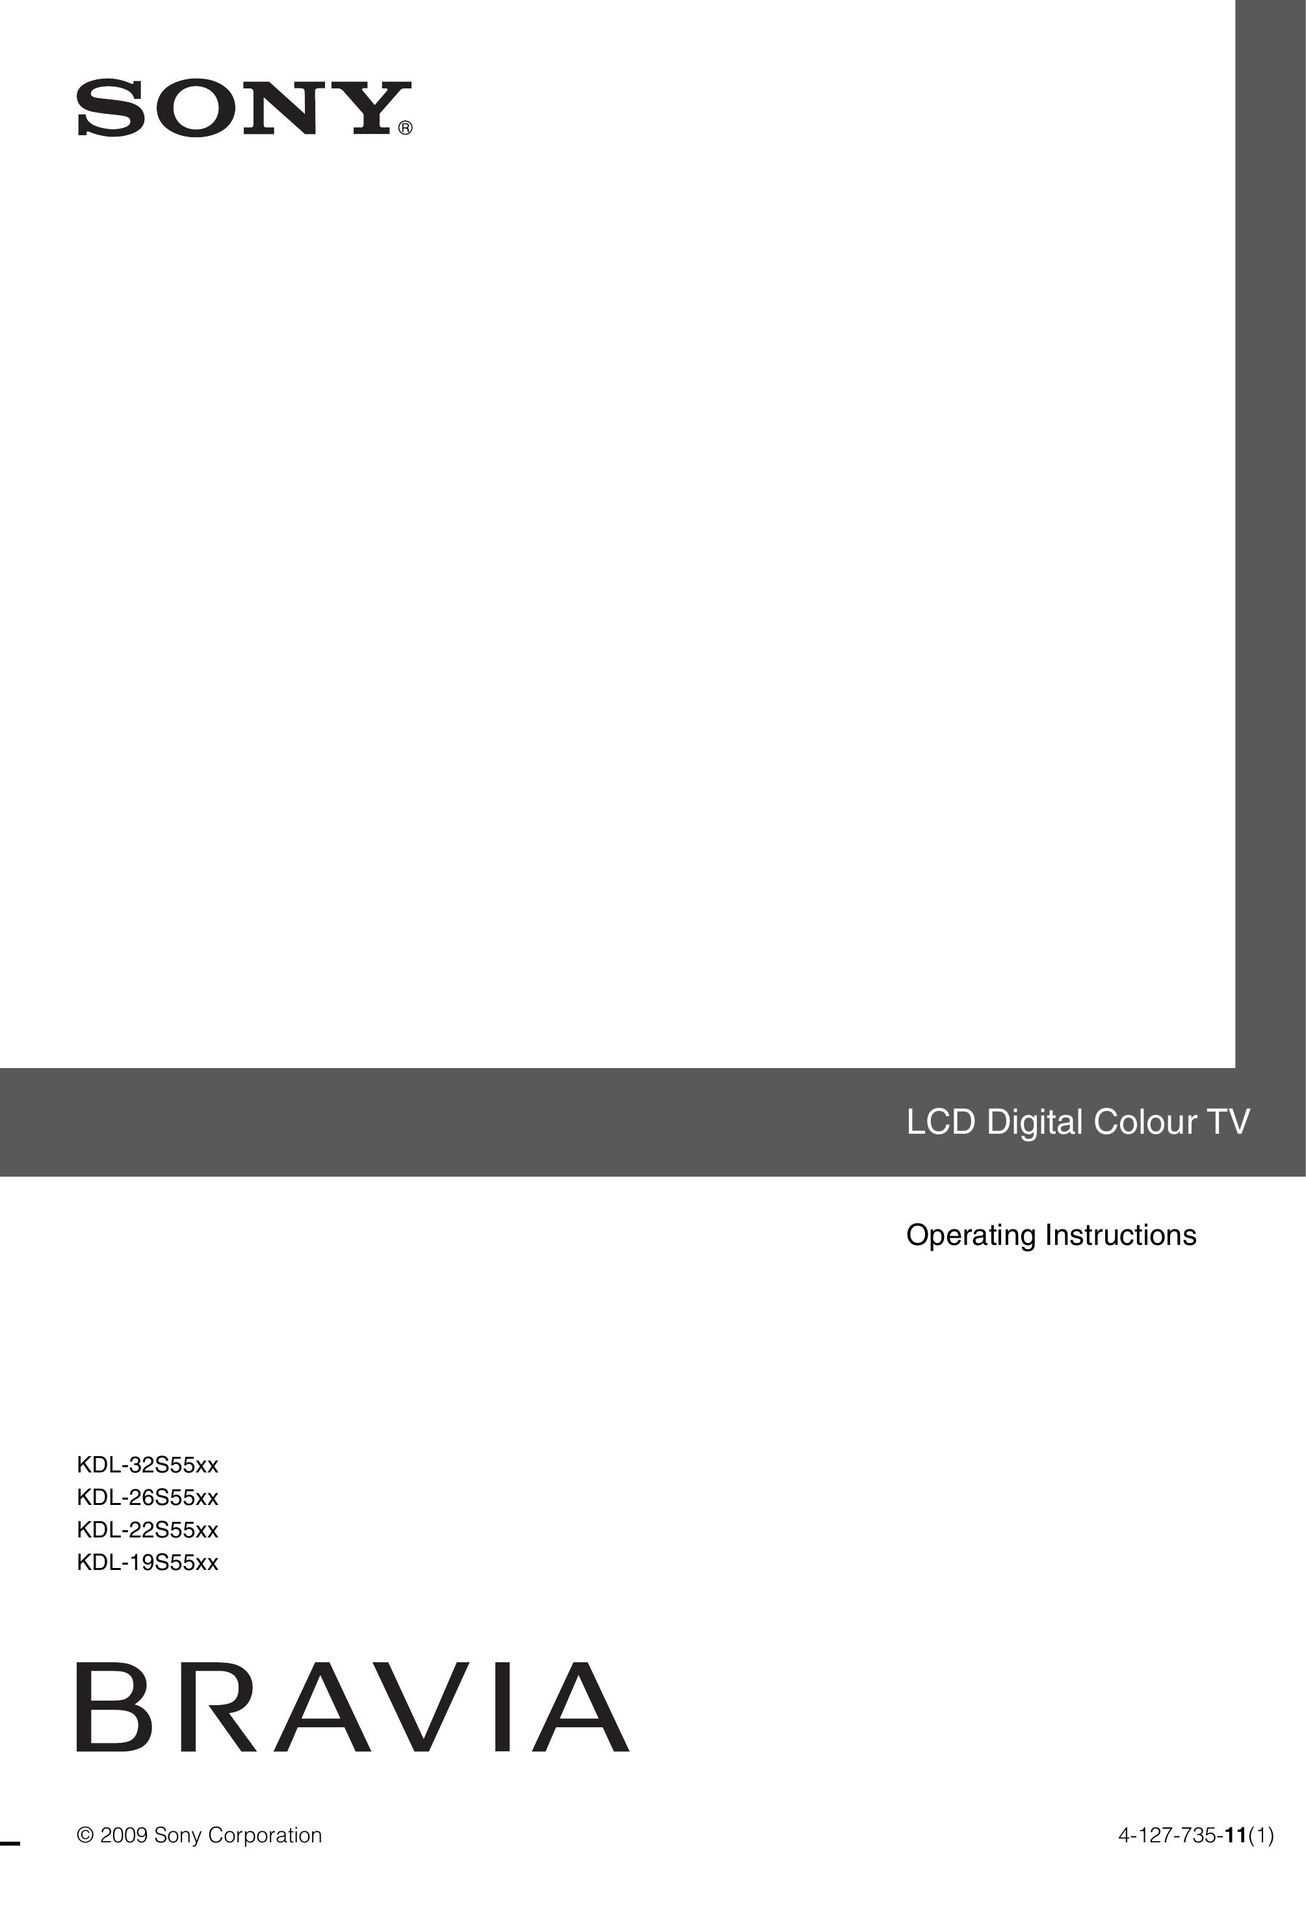 Sony 4-127-735-11(1) Flat Panel Television User Manual